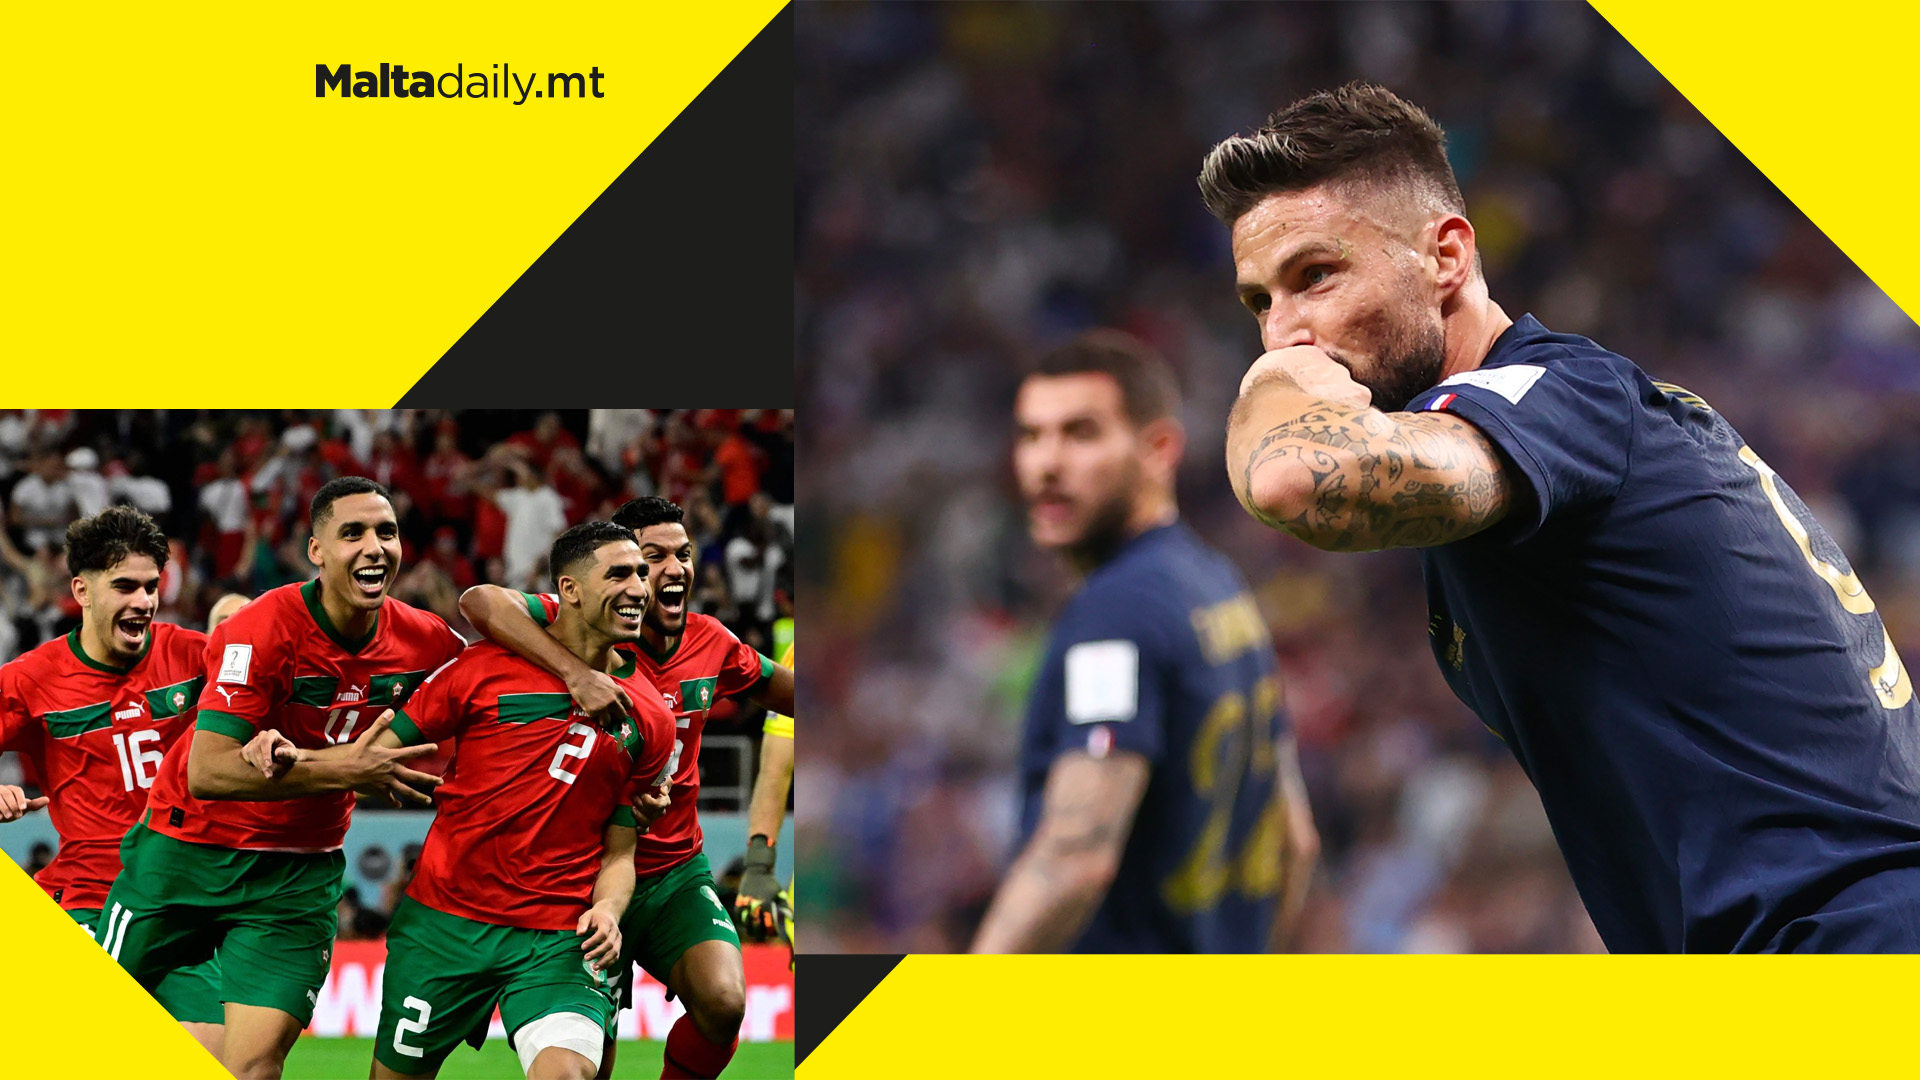 Historic moments that came out of the Qatar World Cup so far